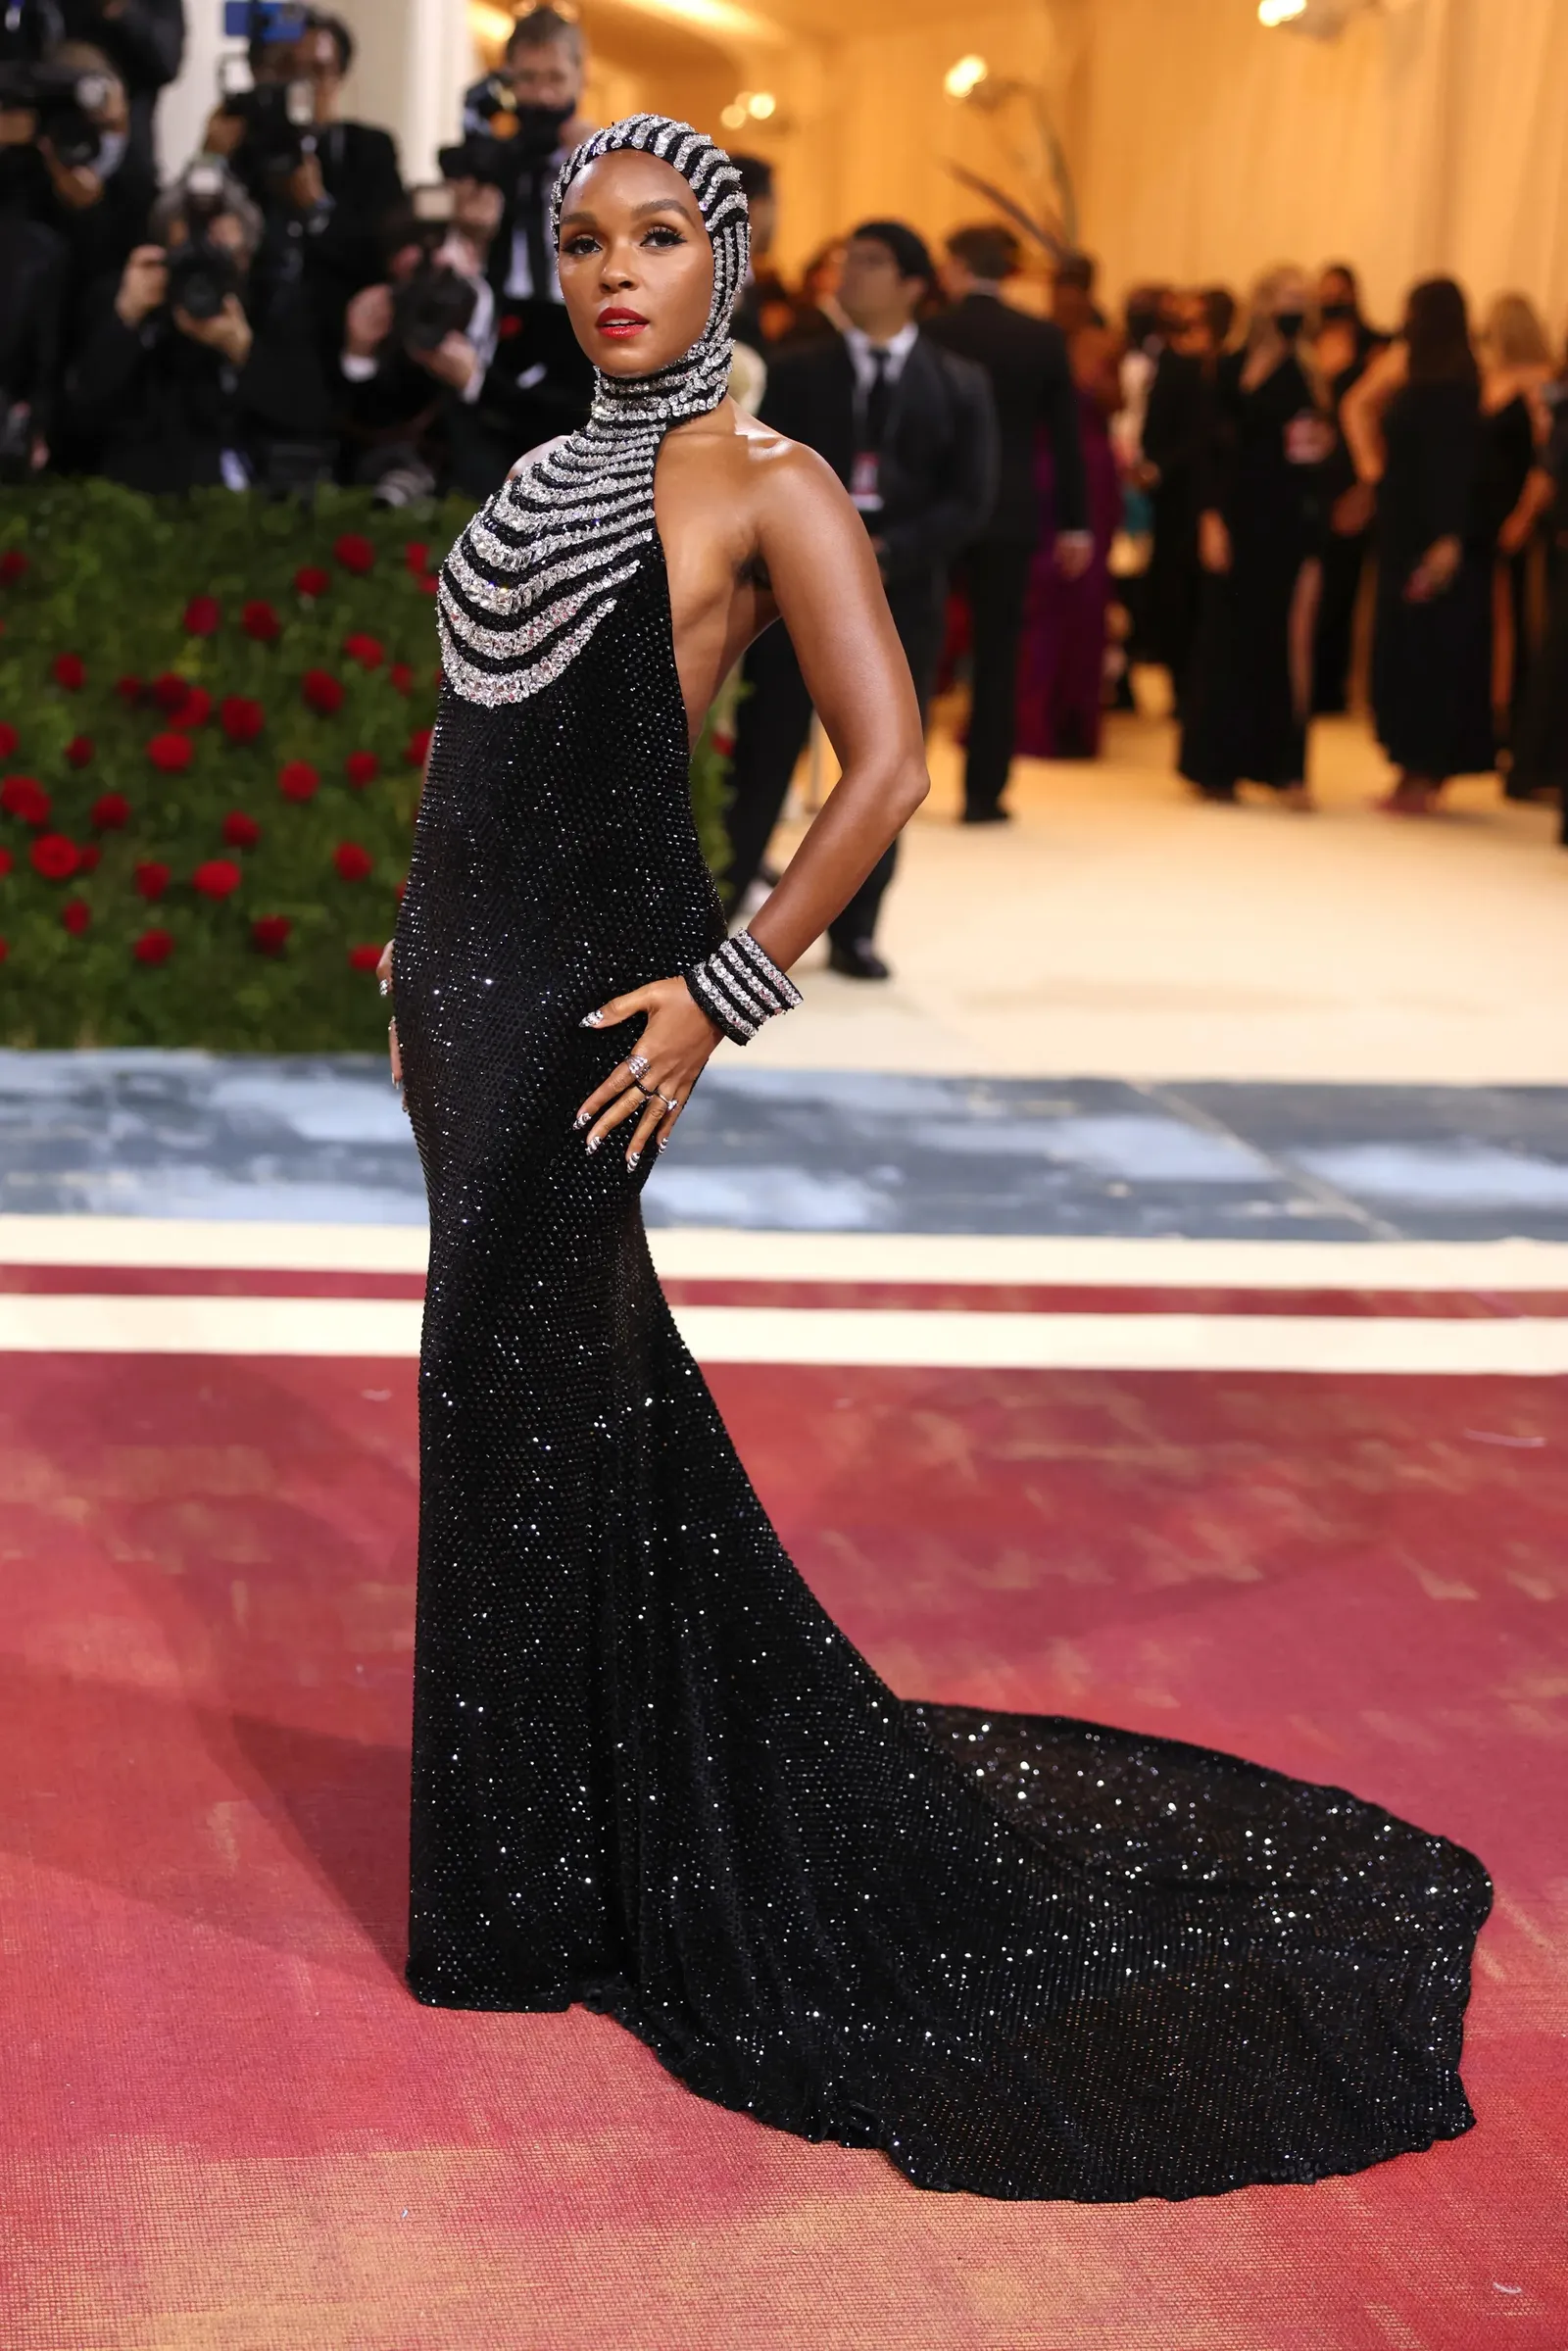 Janelle Monáe at the 2022 Met Gala